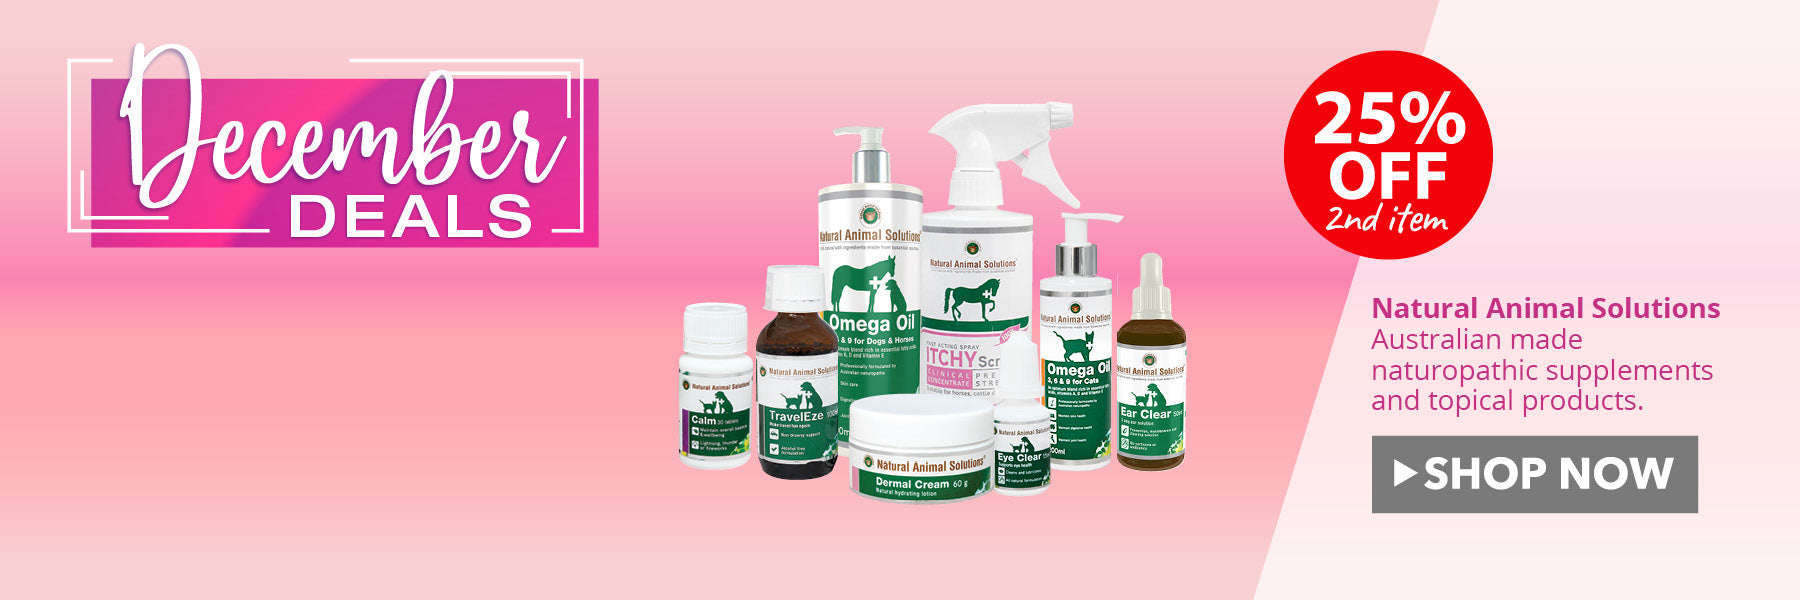 Natural Animal Solutions OFFER